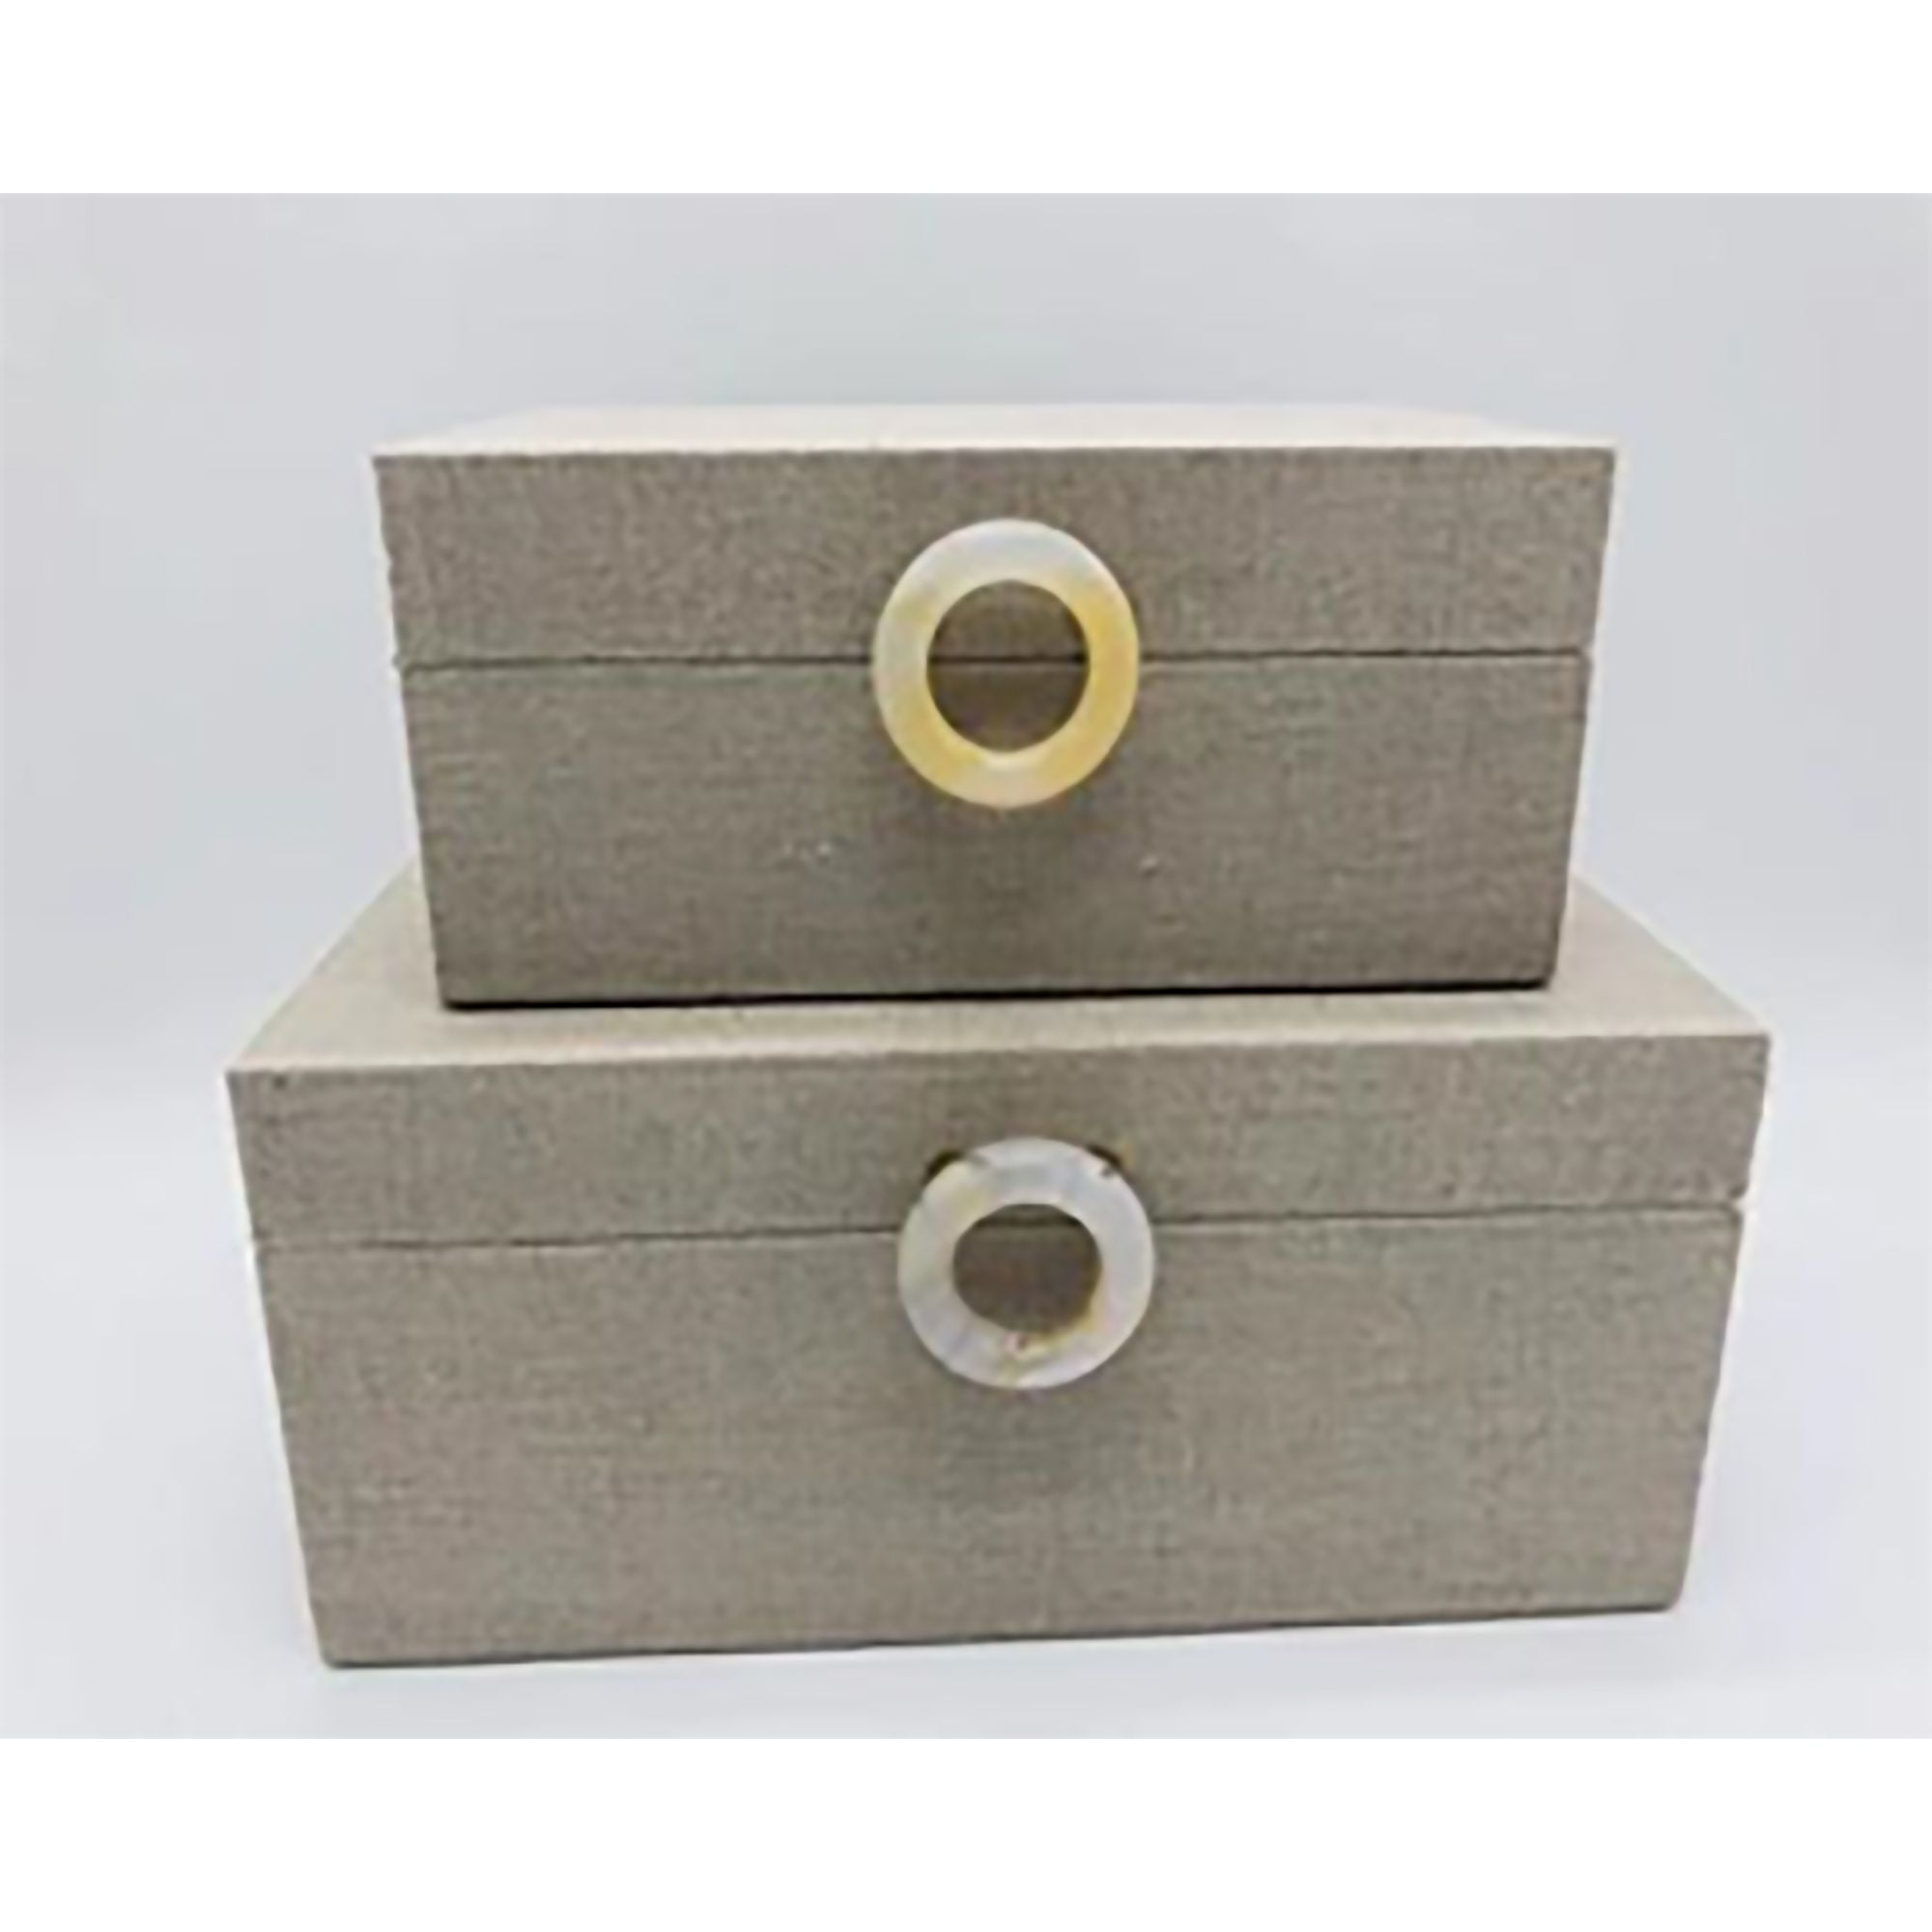 Cream Storage Boxes (Living Room): 55 Items − Sale: at $14.99+